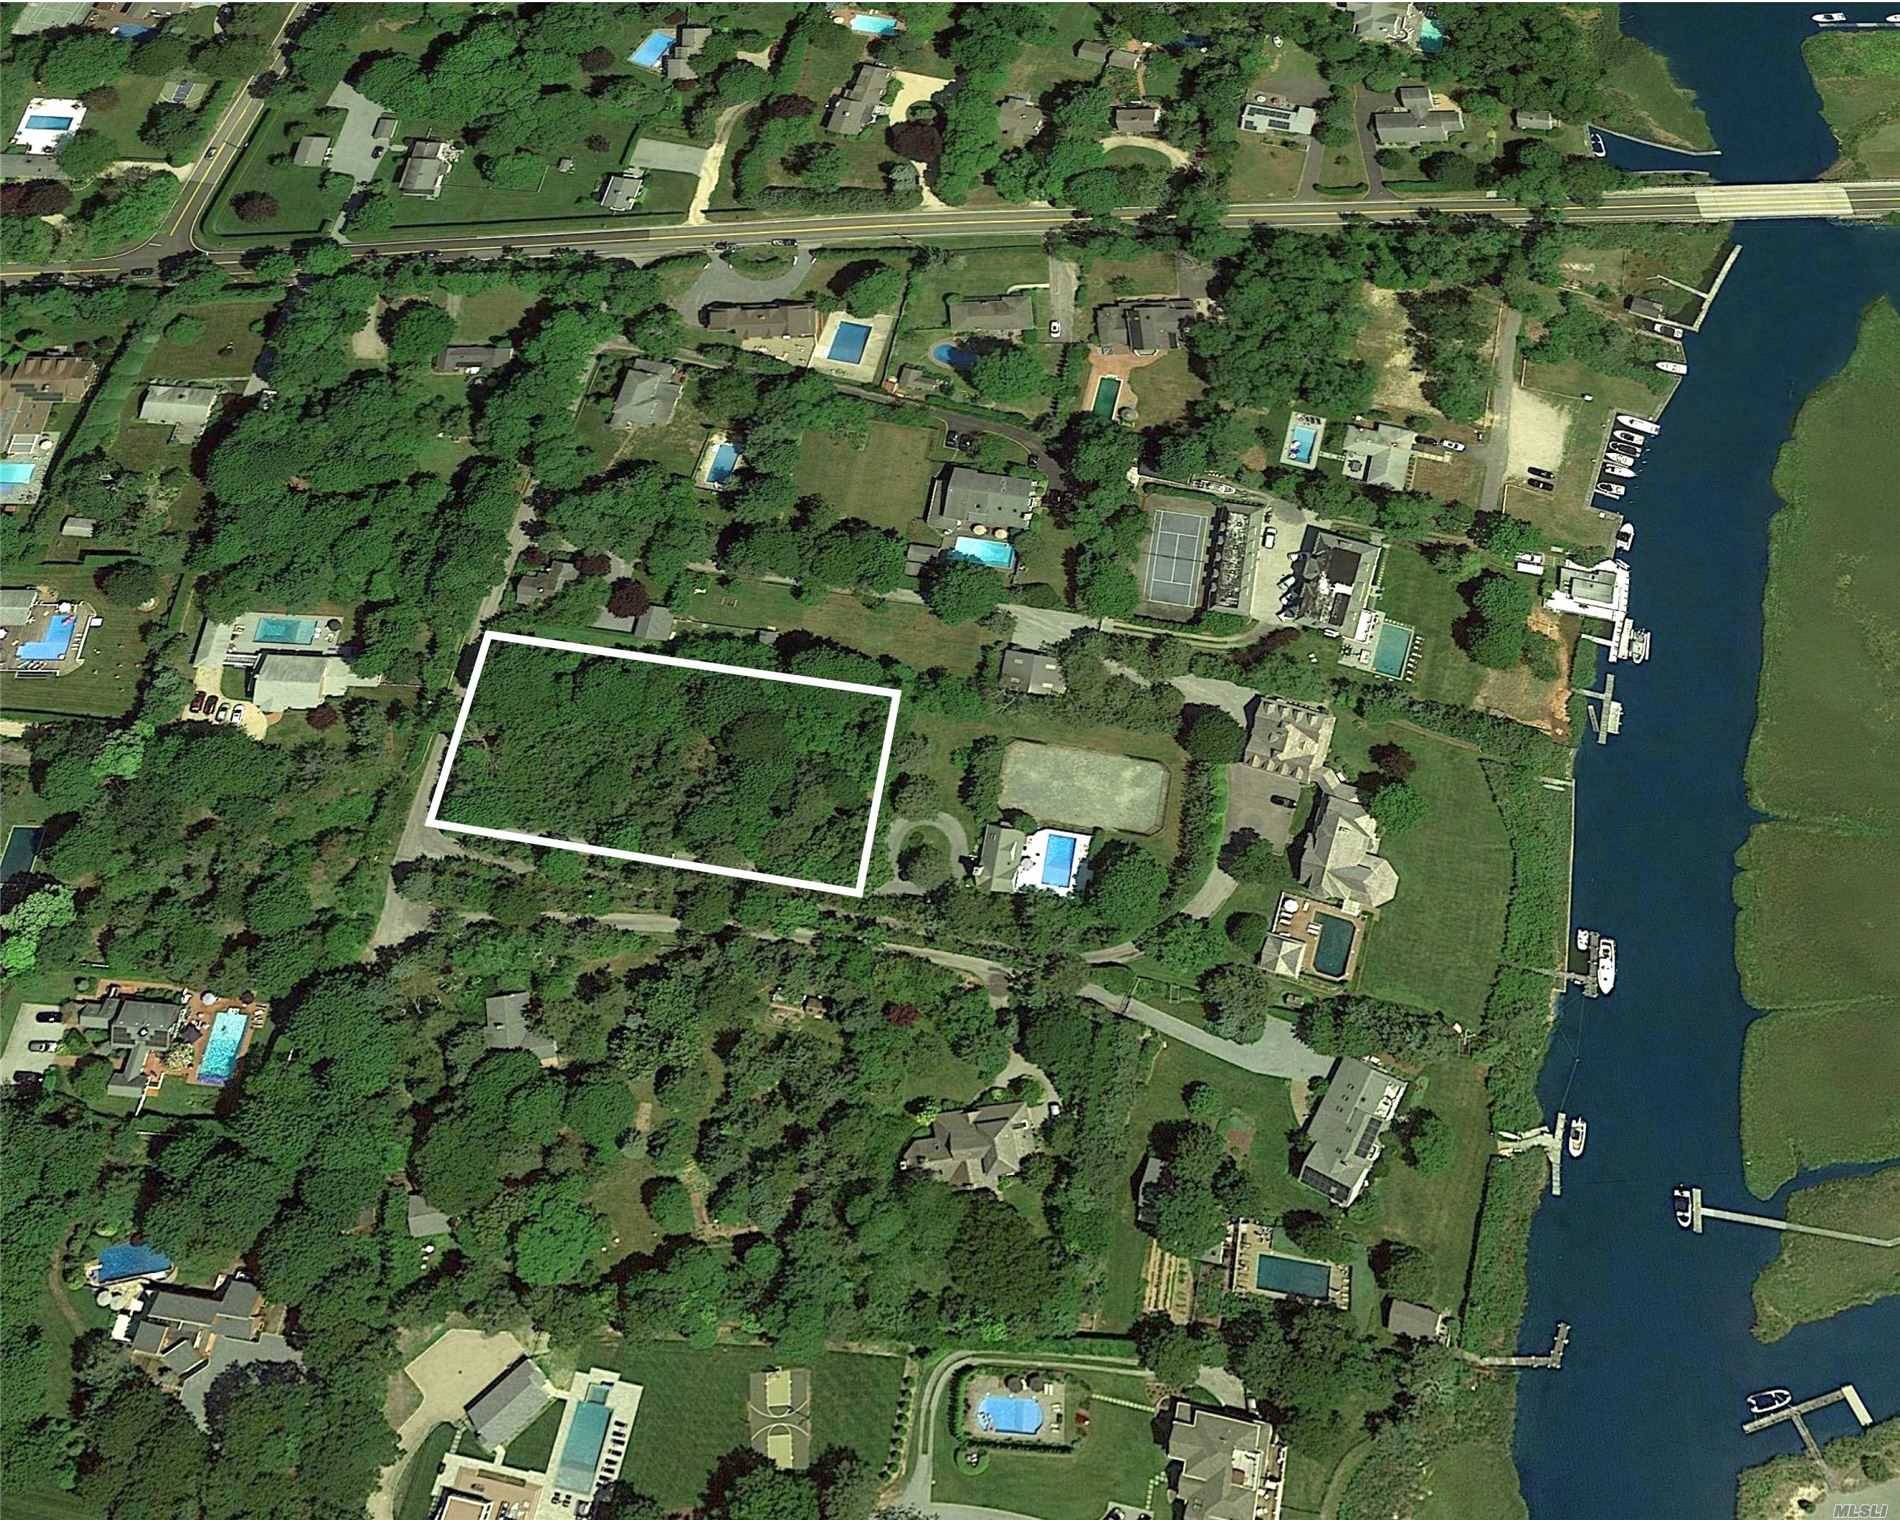 Build your dream home on this prime residential building lot on a charming private country lane in Westhampton.